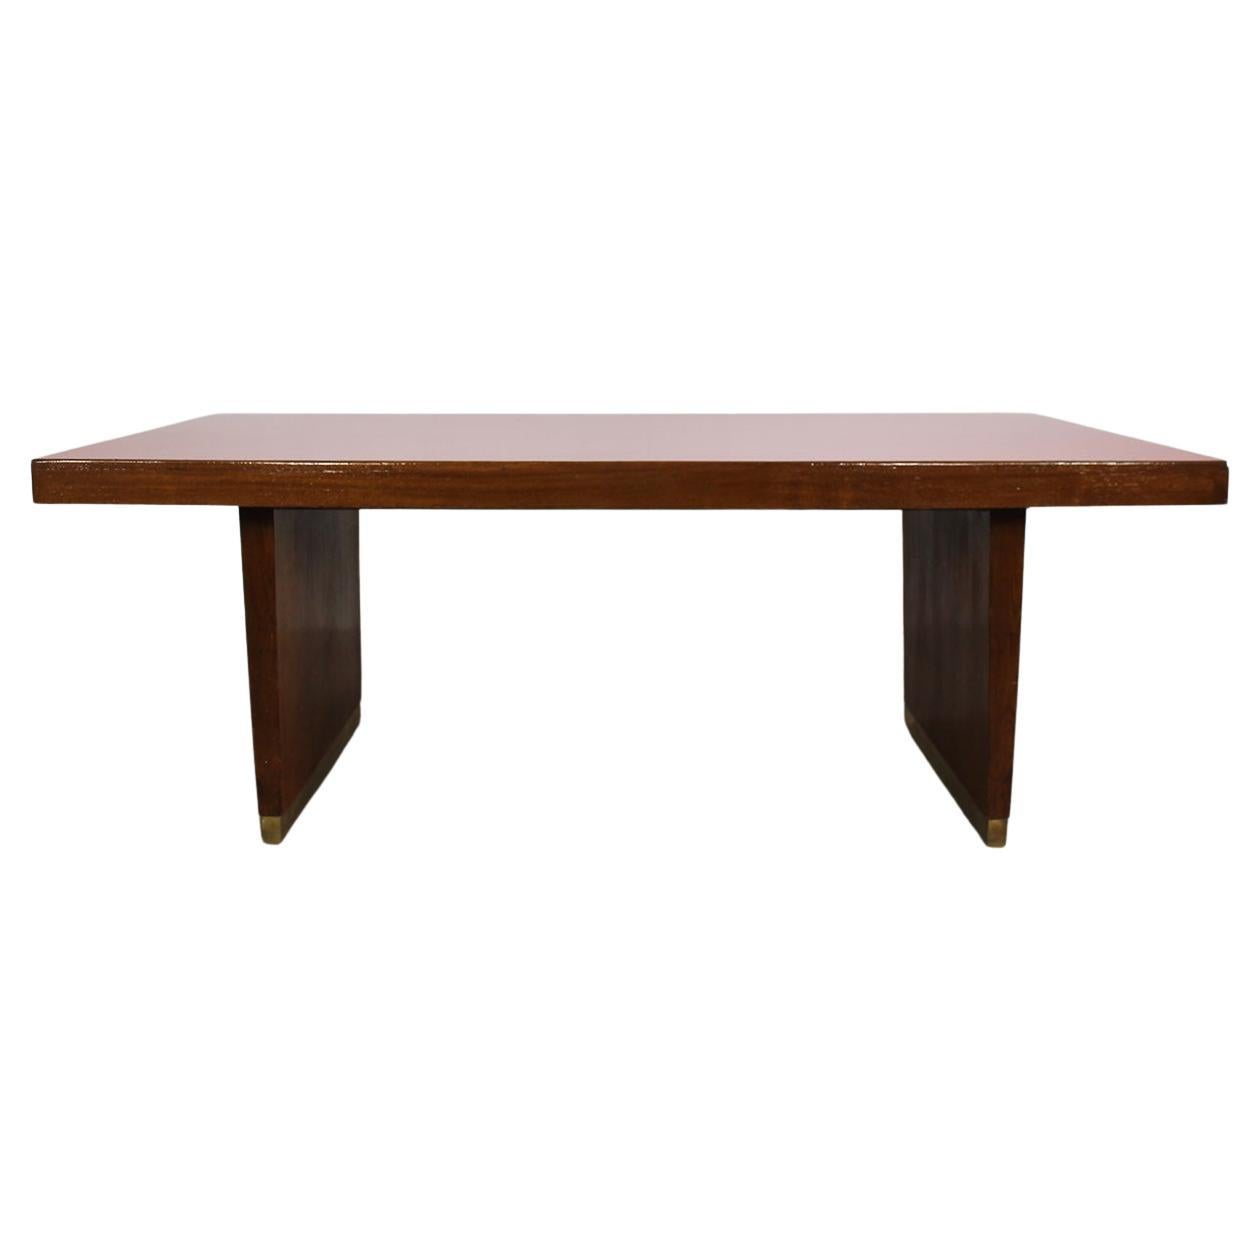 Gio Ponti Table in Oak Brass and Red Laminate Italian Manifacture 1950s For Sale